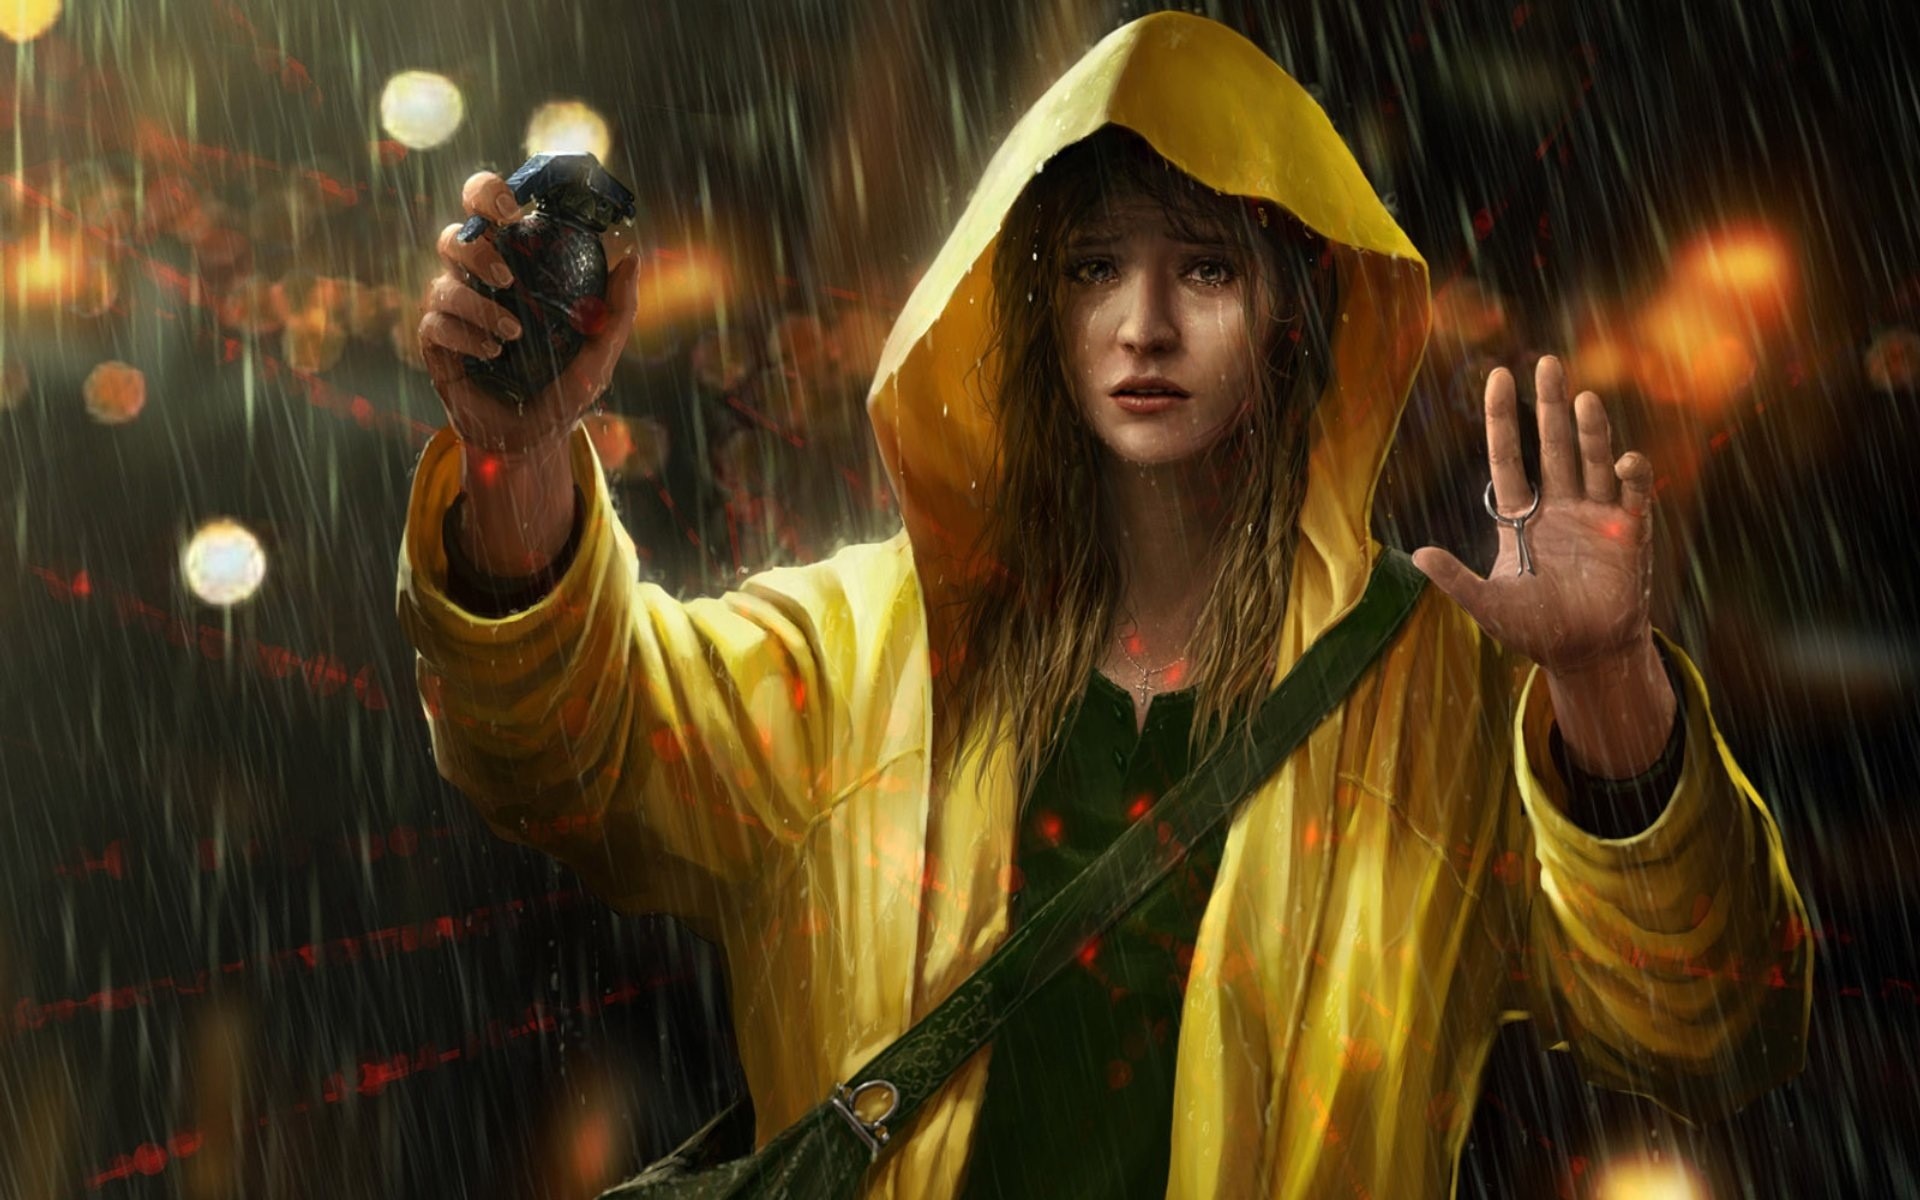 General 1920x1200 artwork grenades women rain hoods arms up crying sad yellow raincoat surrounded